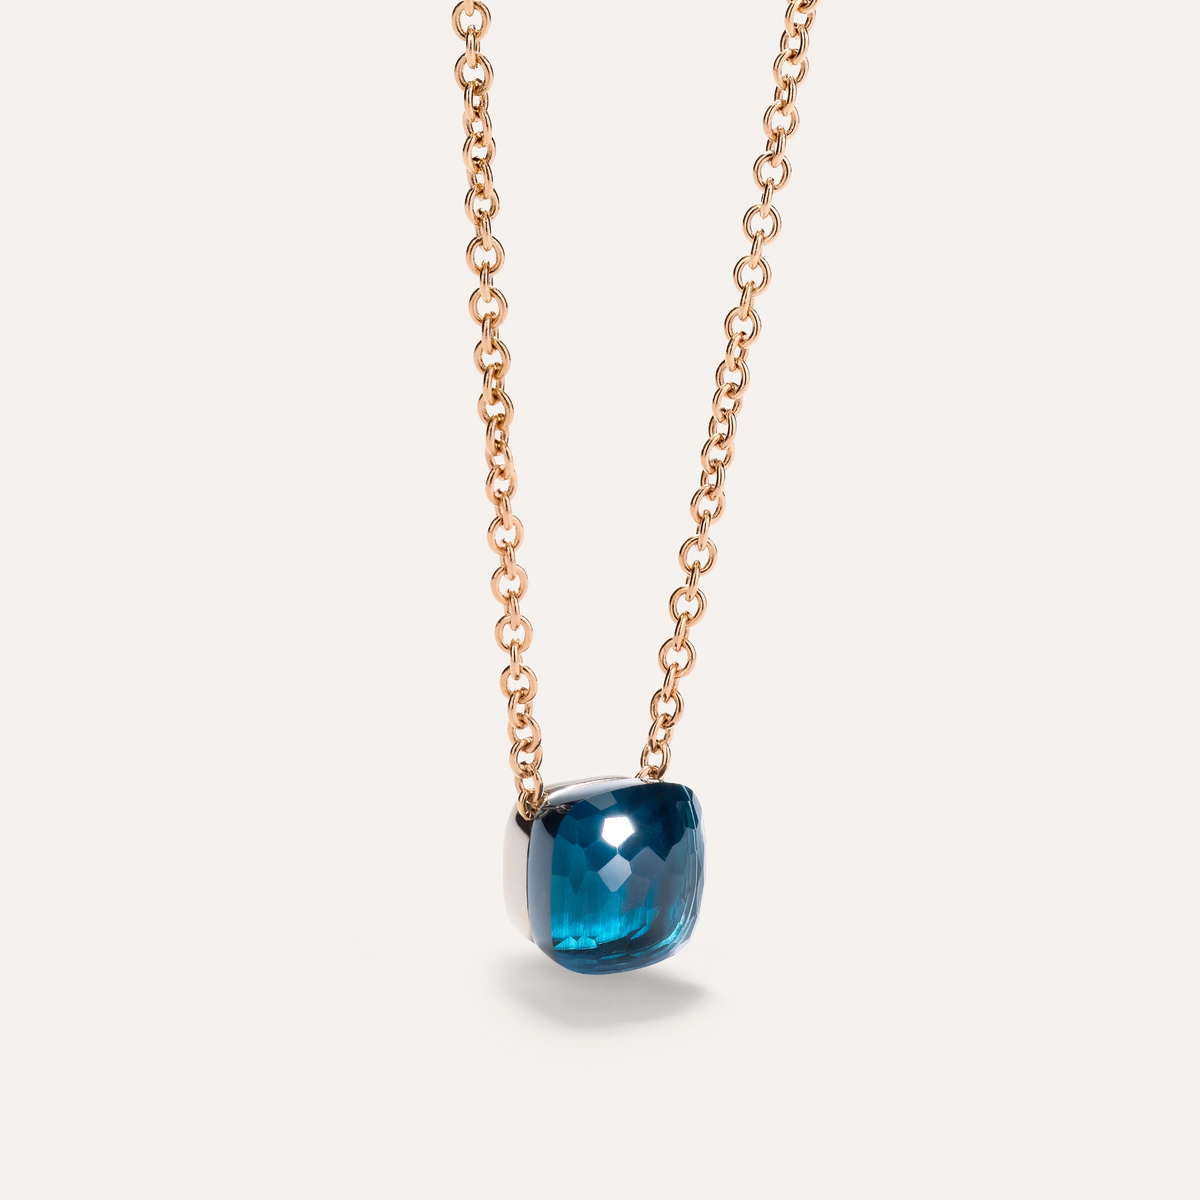 Pomellato Nudo Necklace with Large Pendant, 18k Gold and Blue Topaz